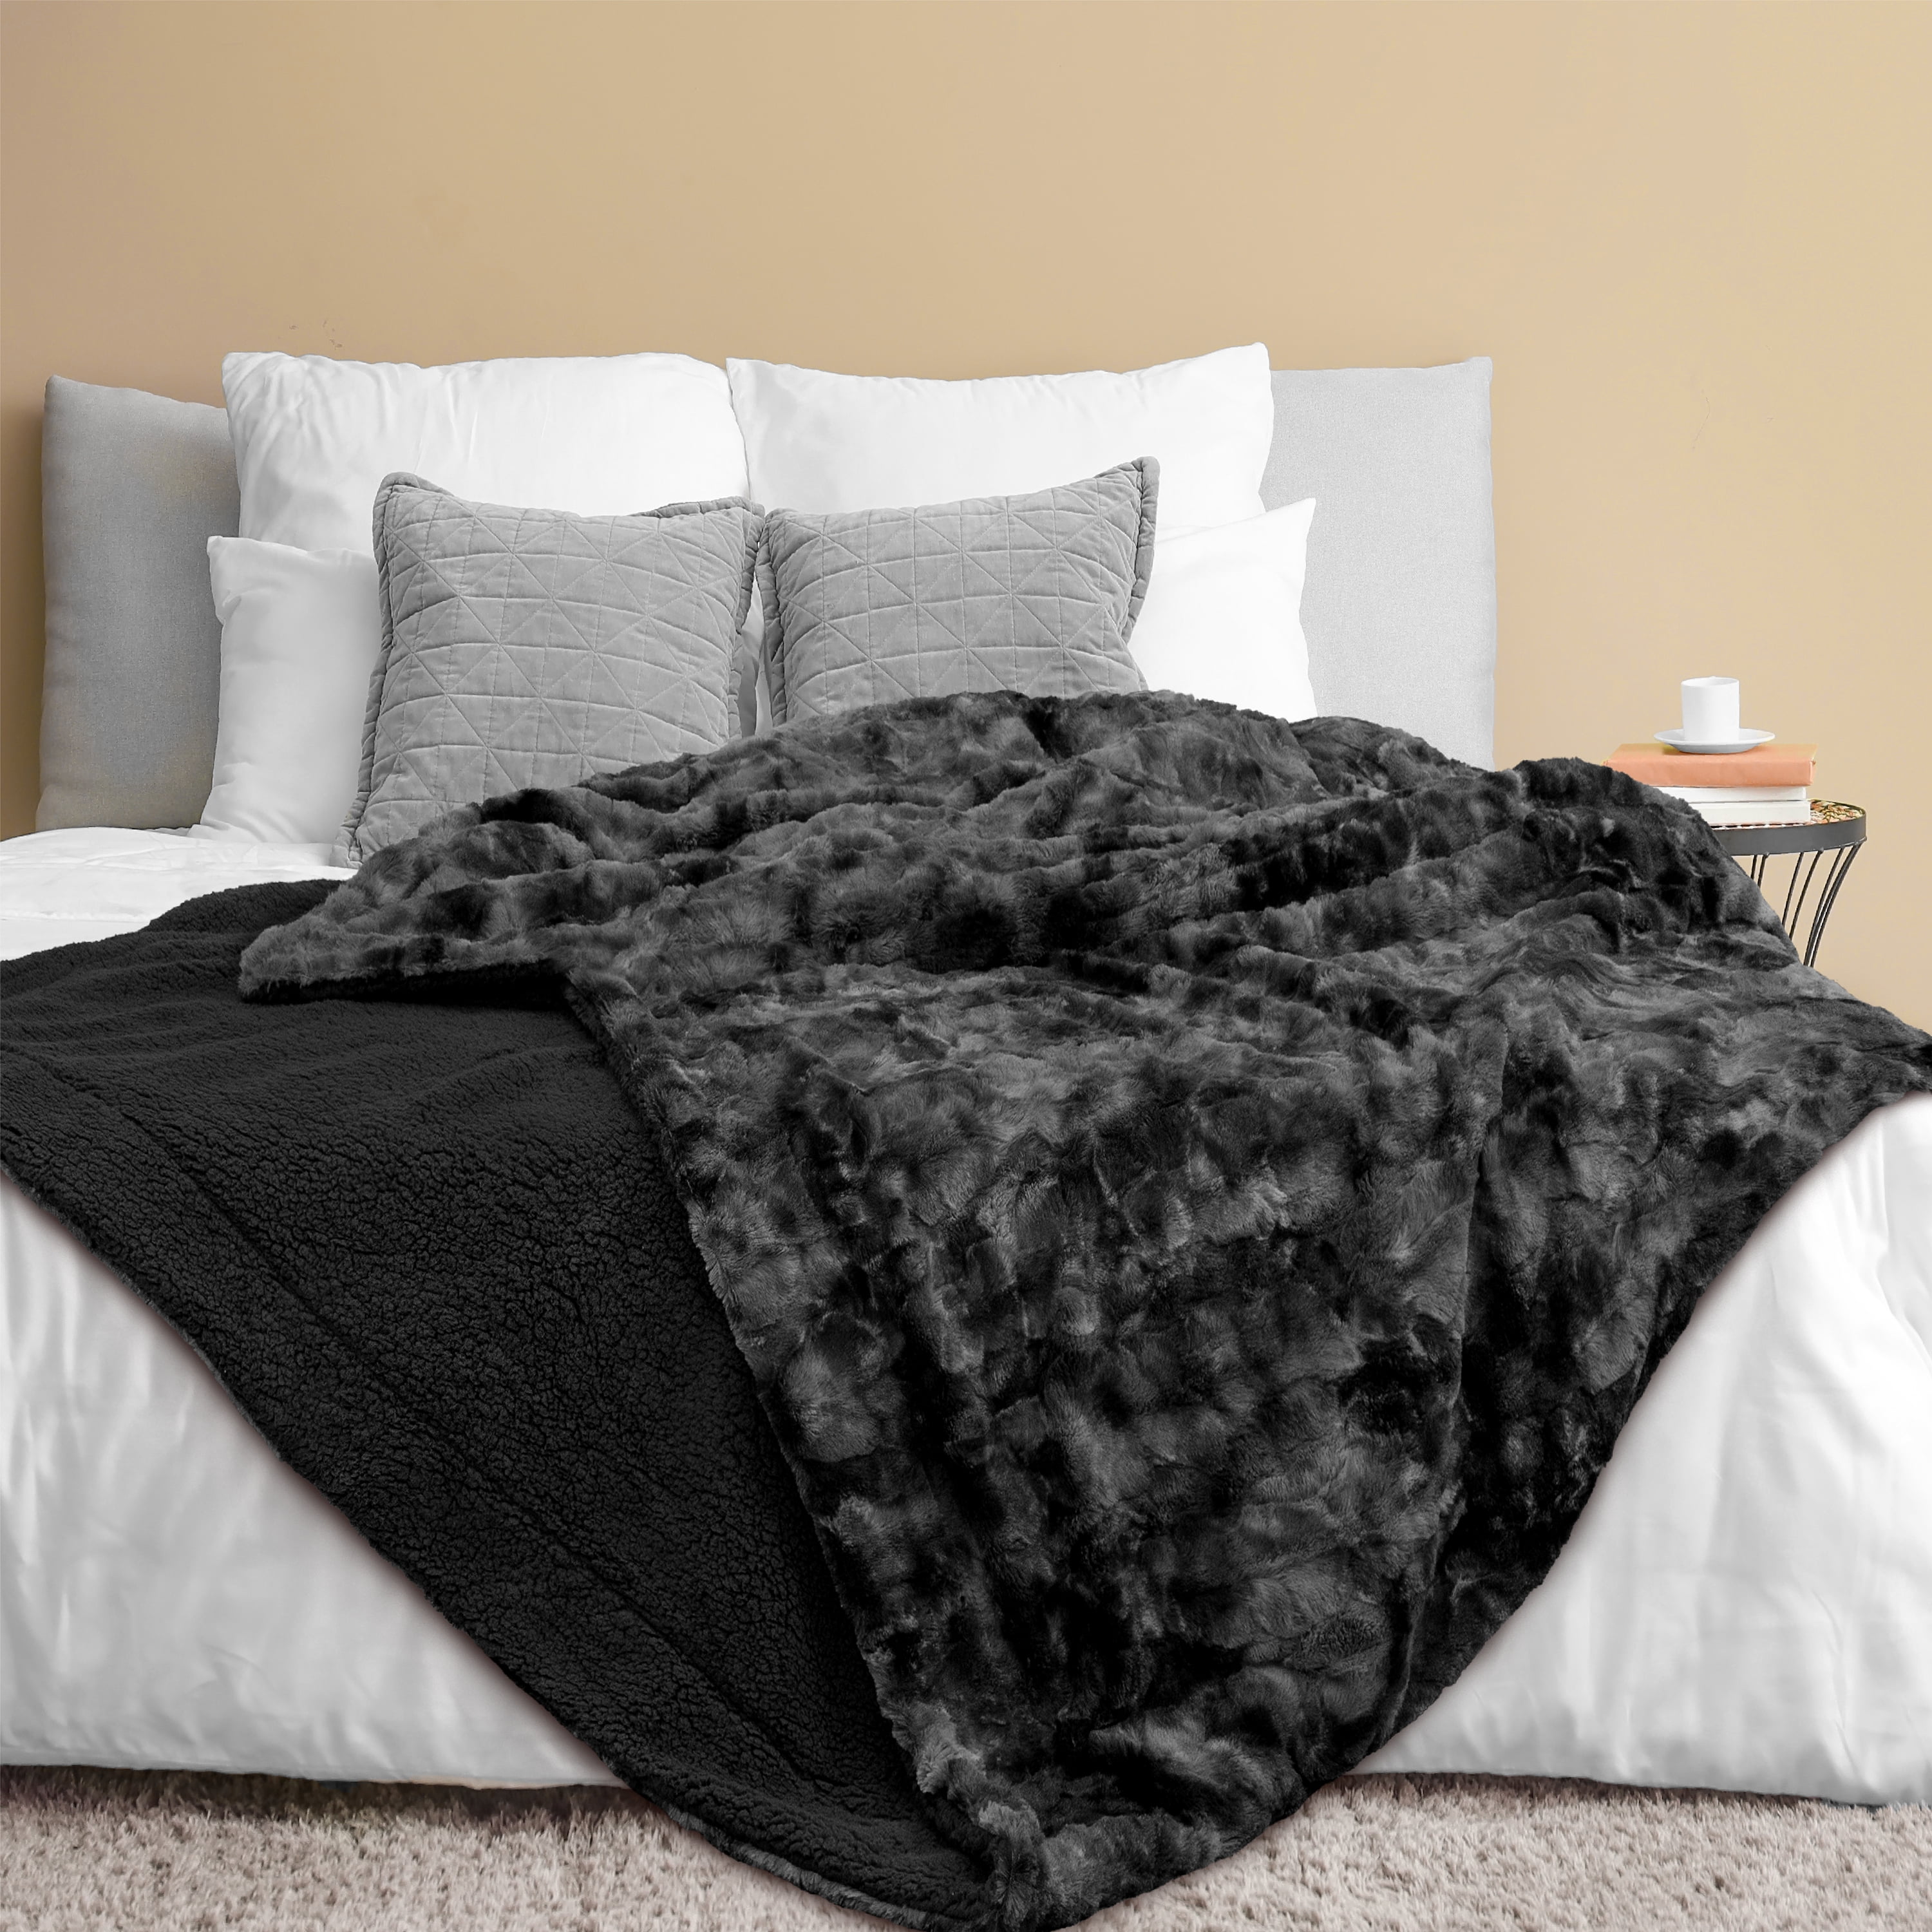 PAVILIA Faux Fur King Bed Blanket Tie-Dye Brown, Soft Fuzzy Warm Sherpa  Blanket for Bed, Fluffy Plush Thick Fleece Throw Blanket for Couch Sofa, Reversible  Furry Shaggy Large Blanket, Brown 90x108 